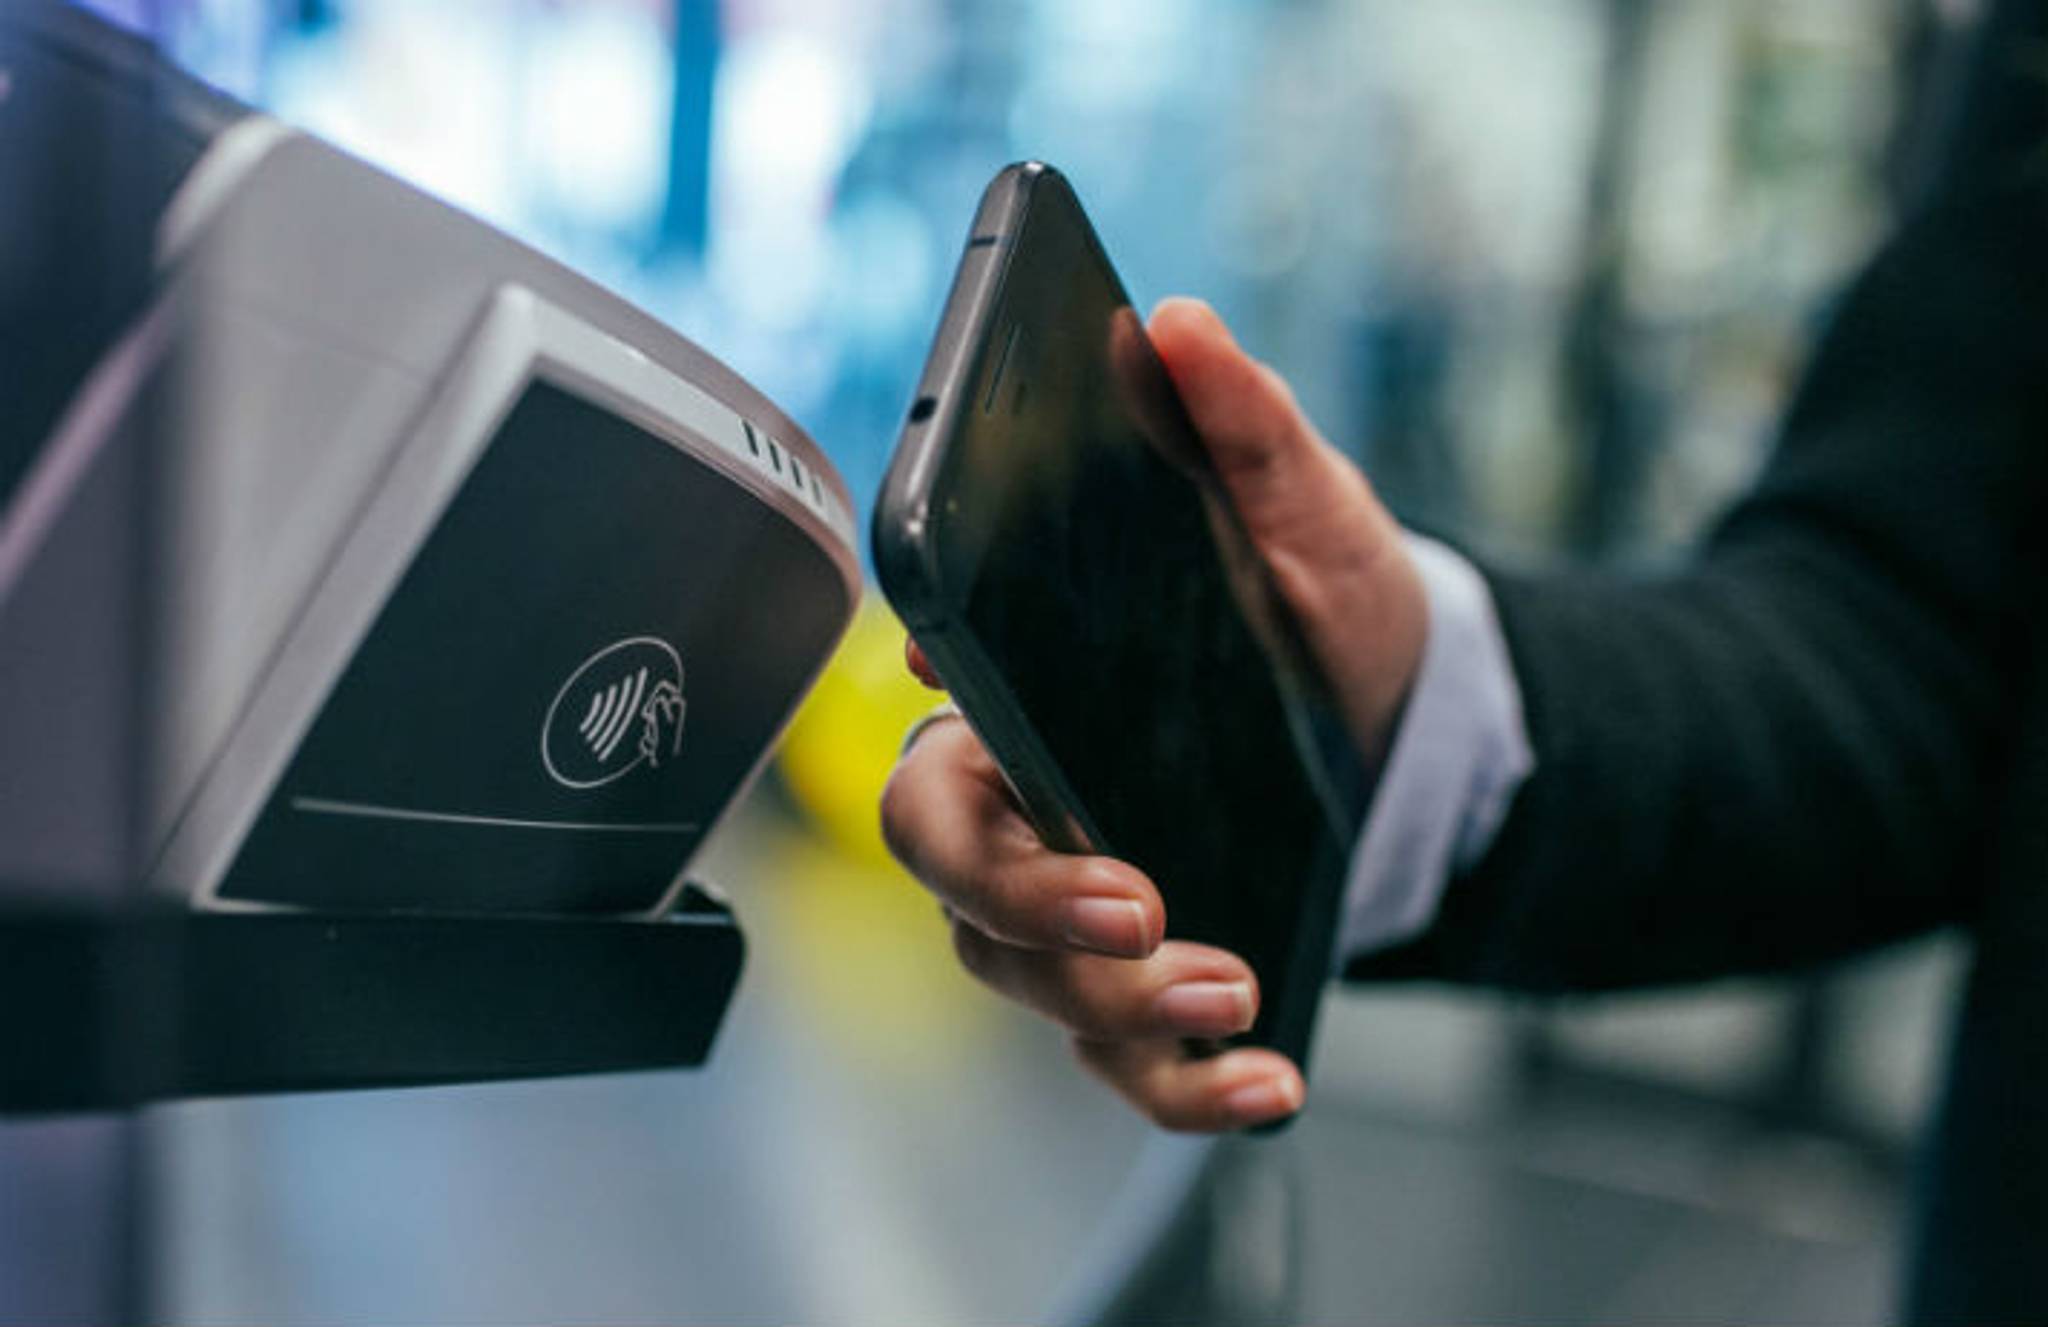 NatWest's biometric card makes spending frictionless